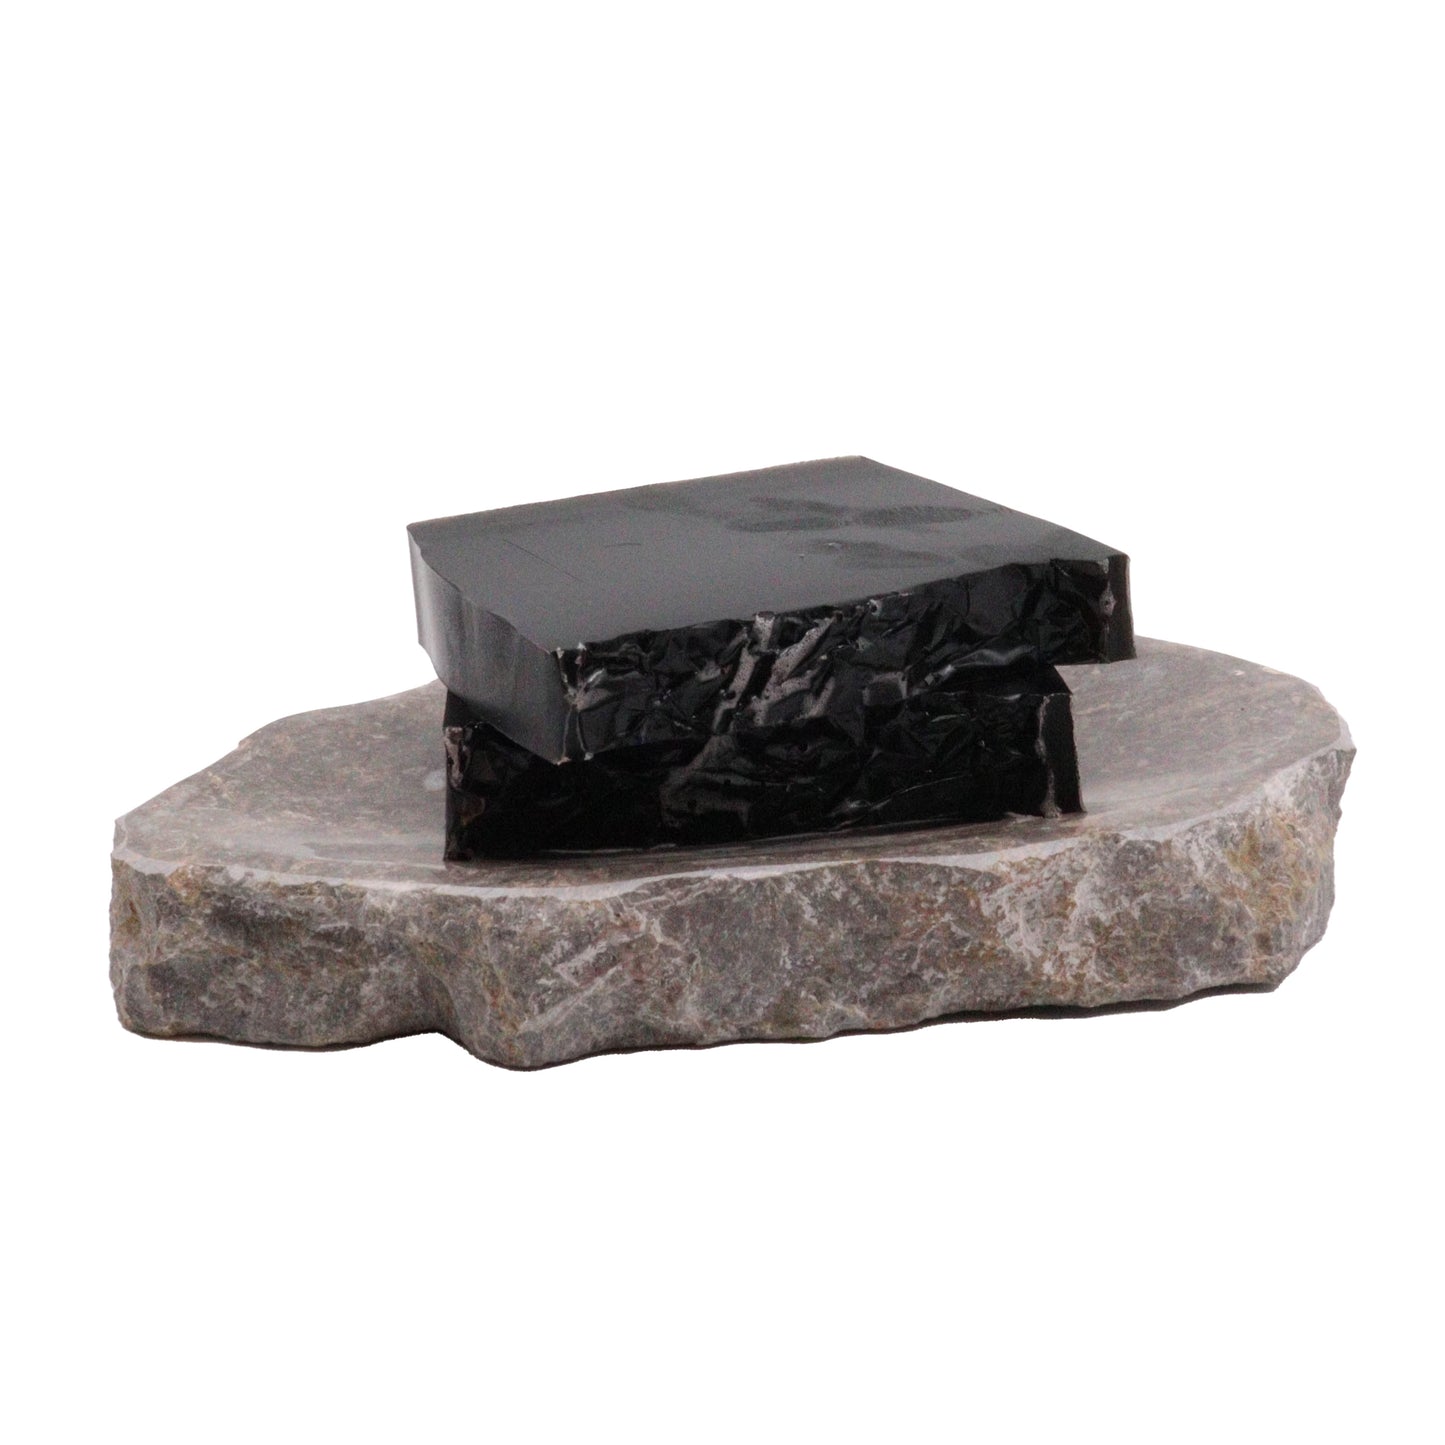 Harmony Noir - Artisan Handcrafted Soap - Slice or Loaf - Cosmic Serenity Shop